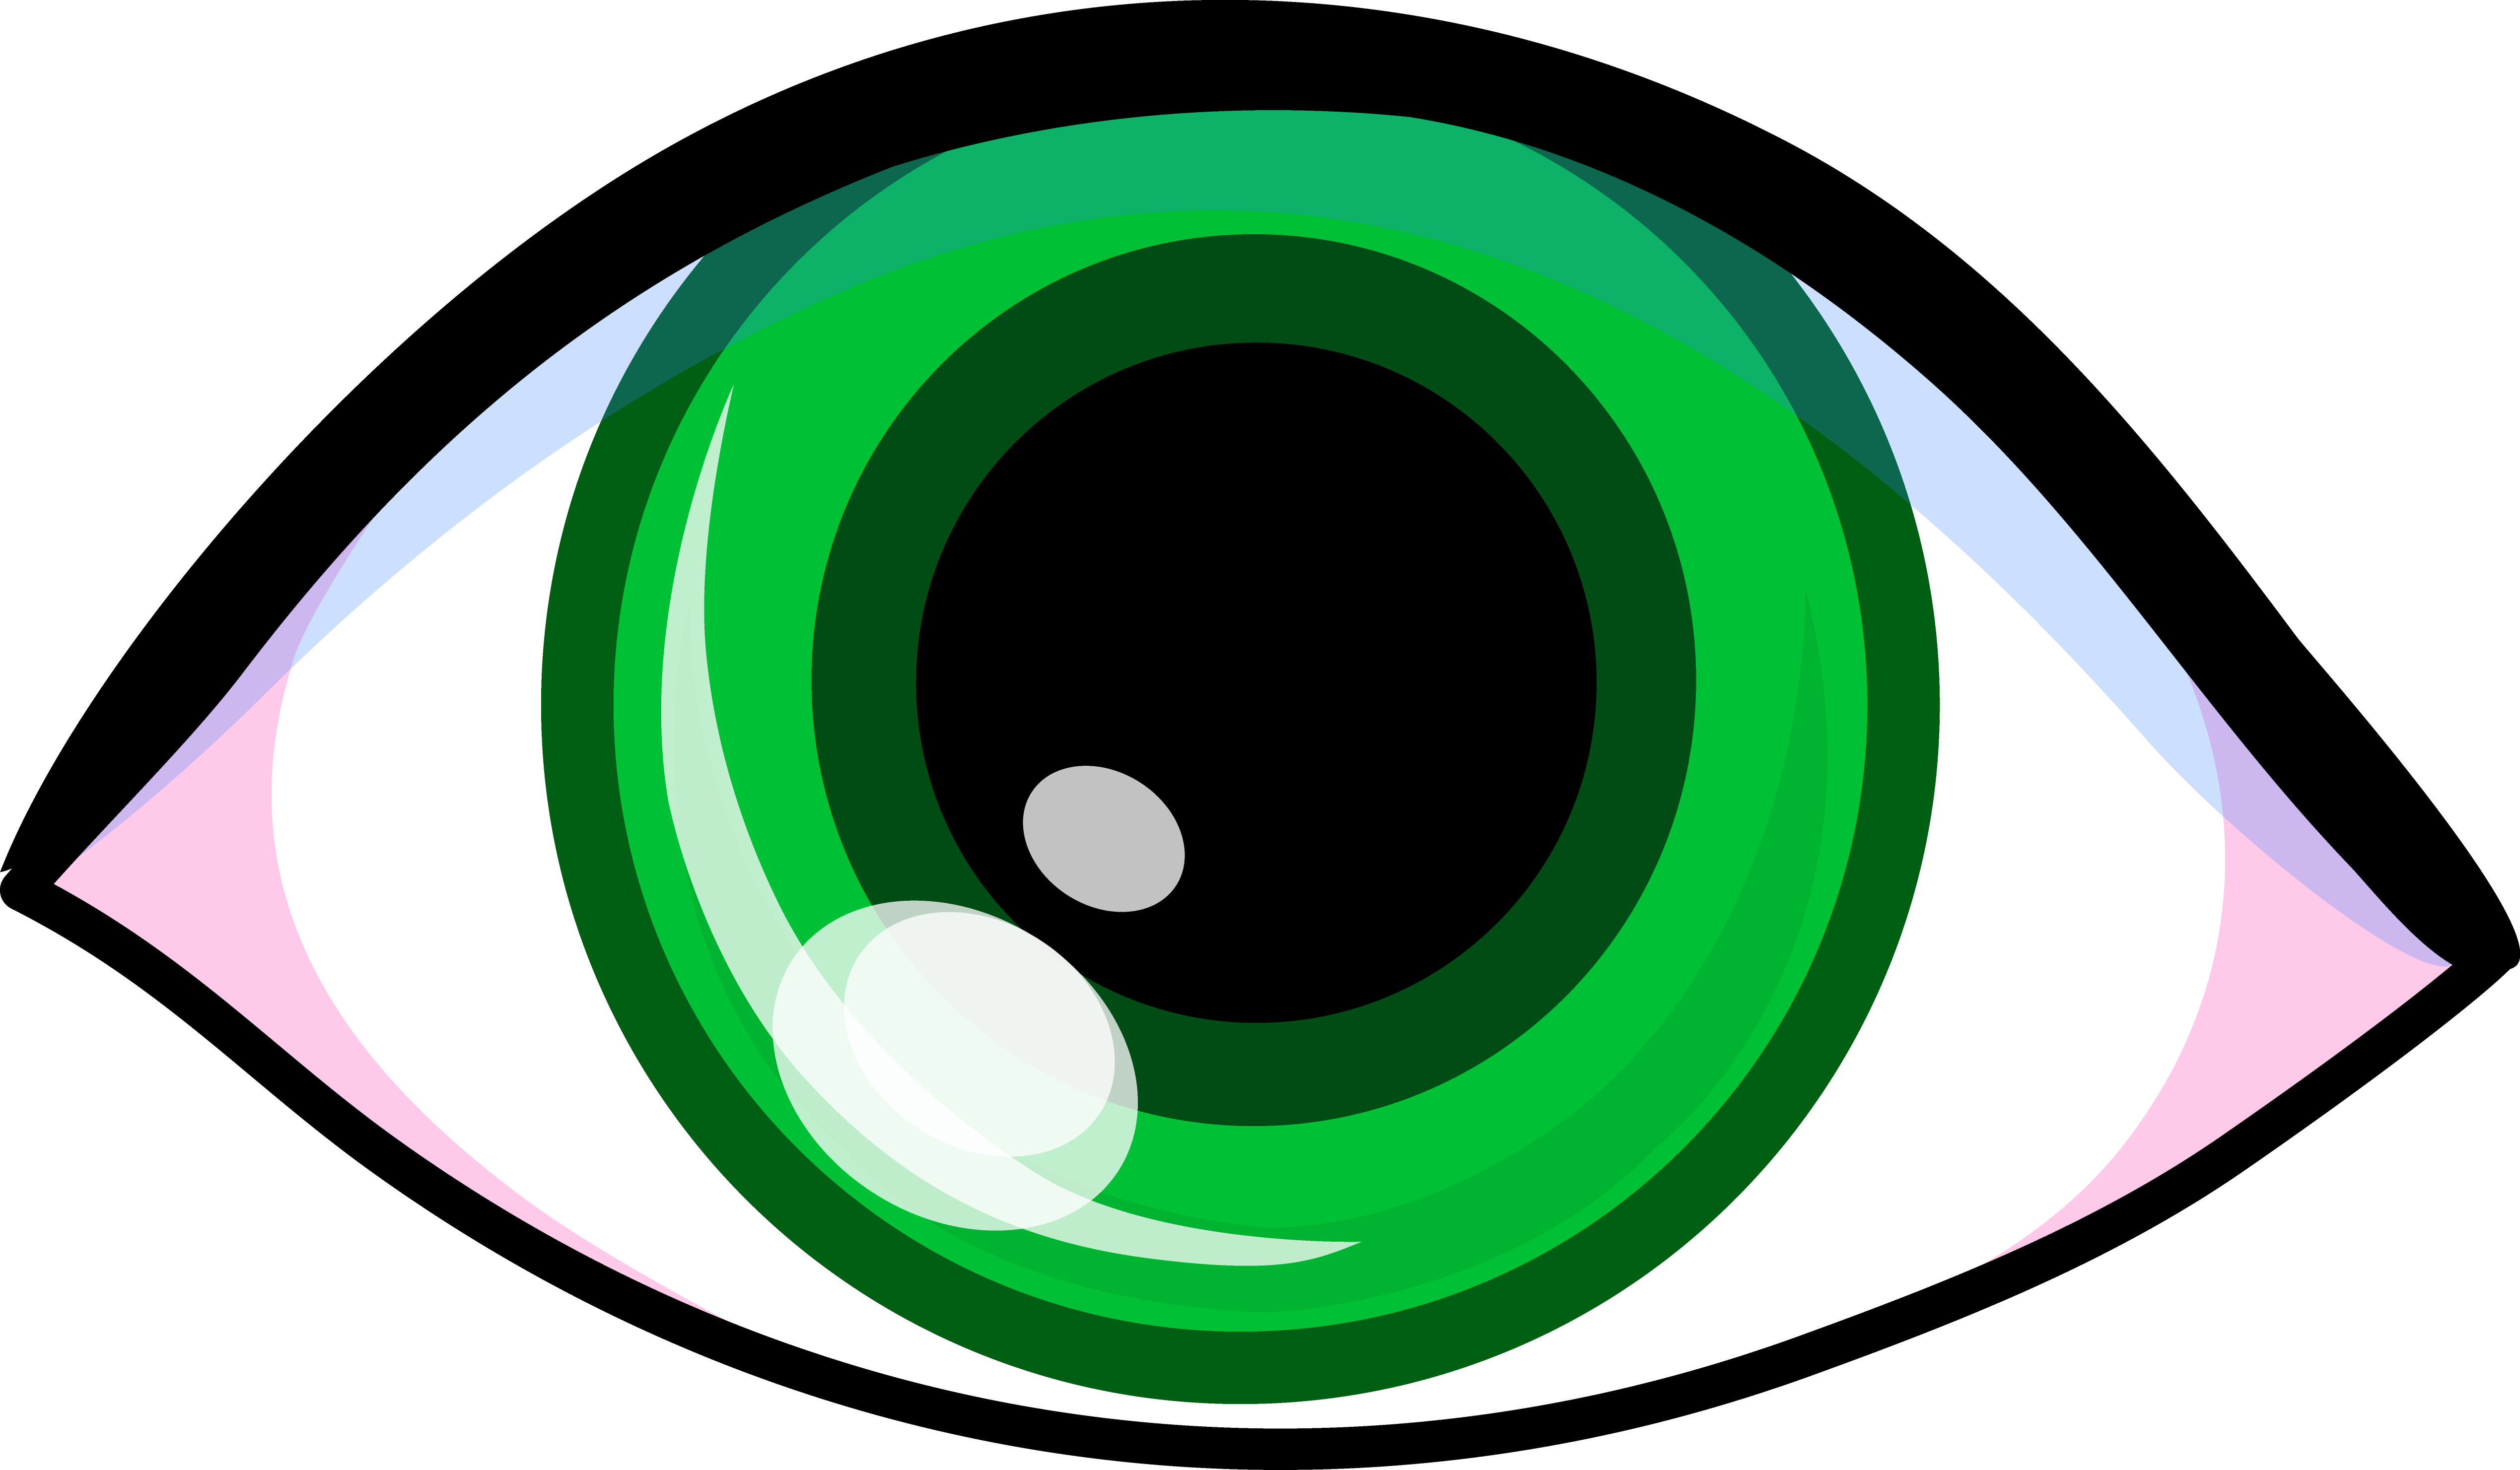 Black and White with Green Eye Logo - Eyeballs clipart download halloween - RR collections